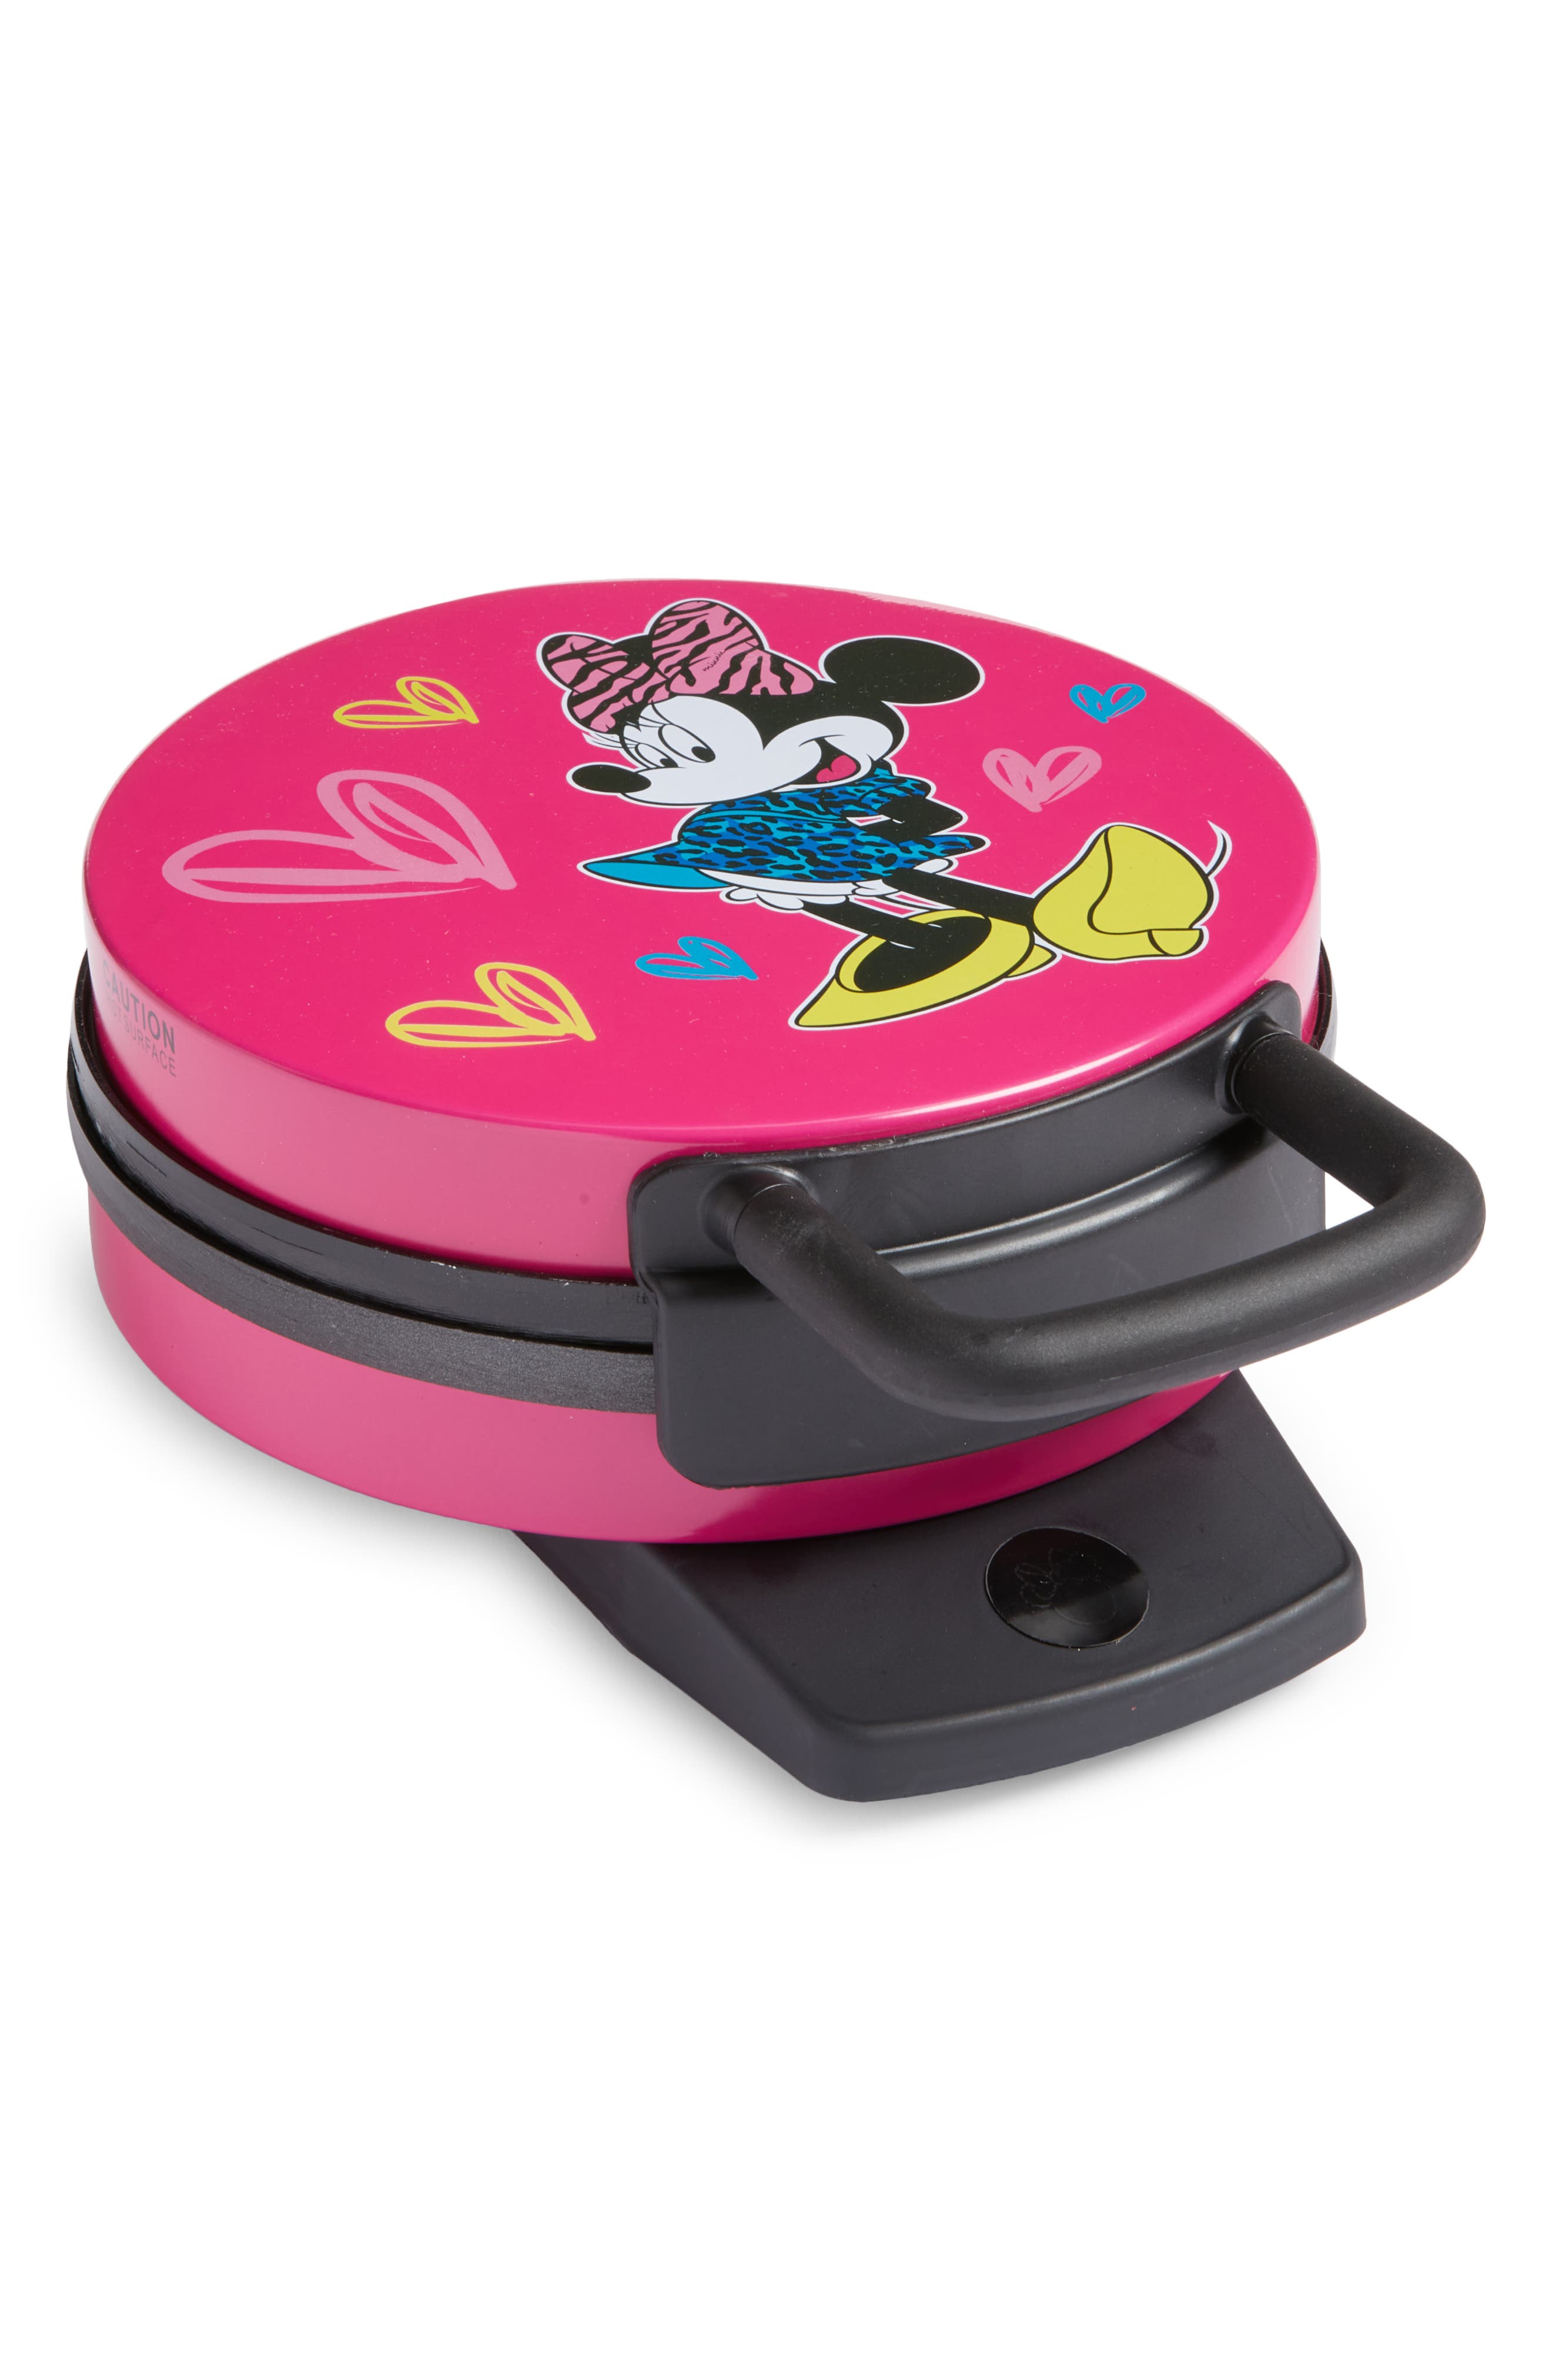 UPC 655772013675 product image for Disney Minnie Mouse Waffle Maker, Size One Size - Pink | upcitemdb.com